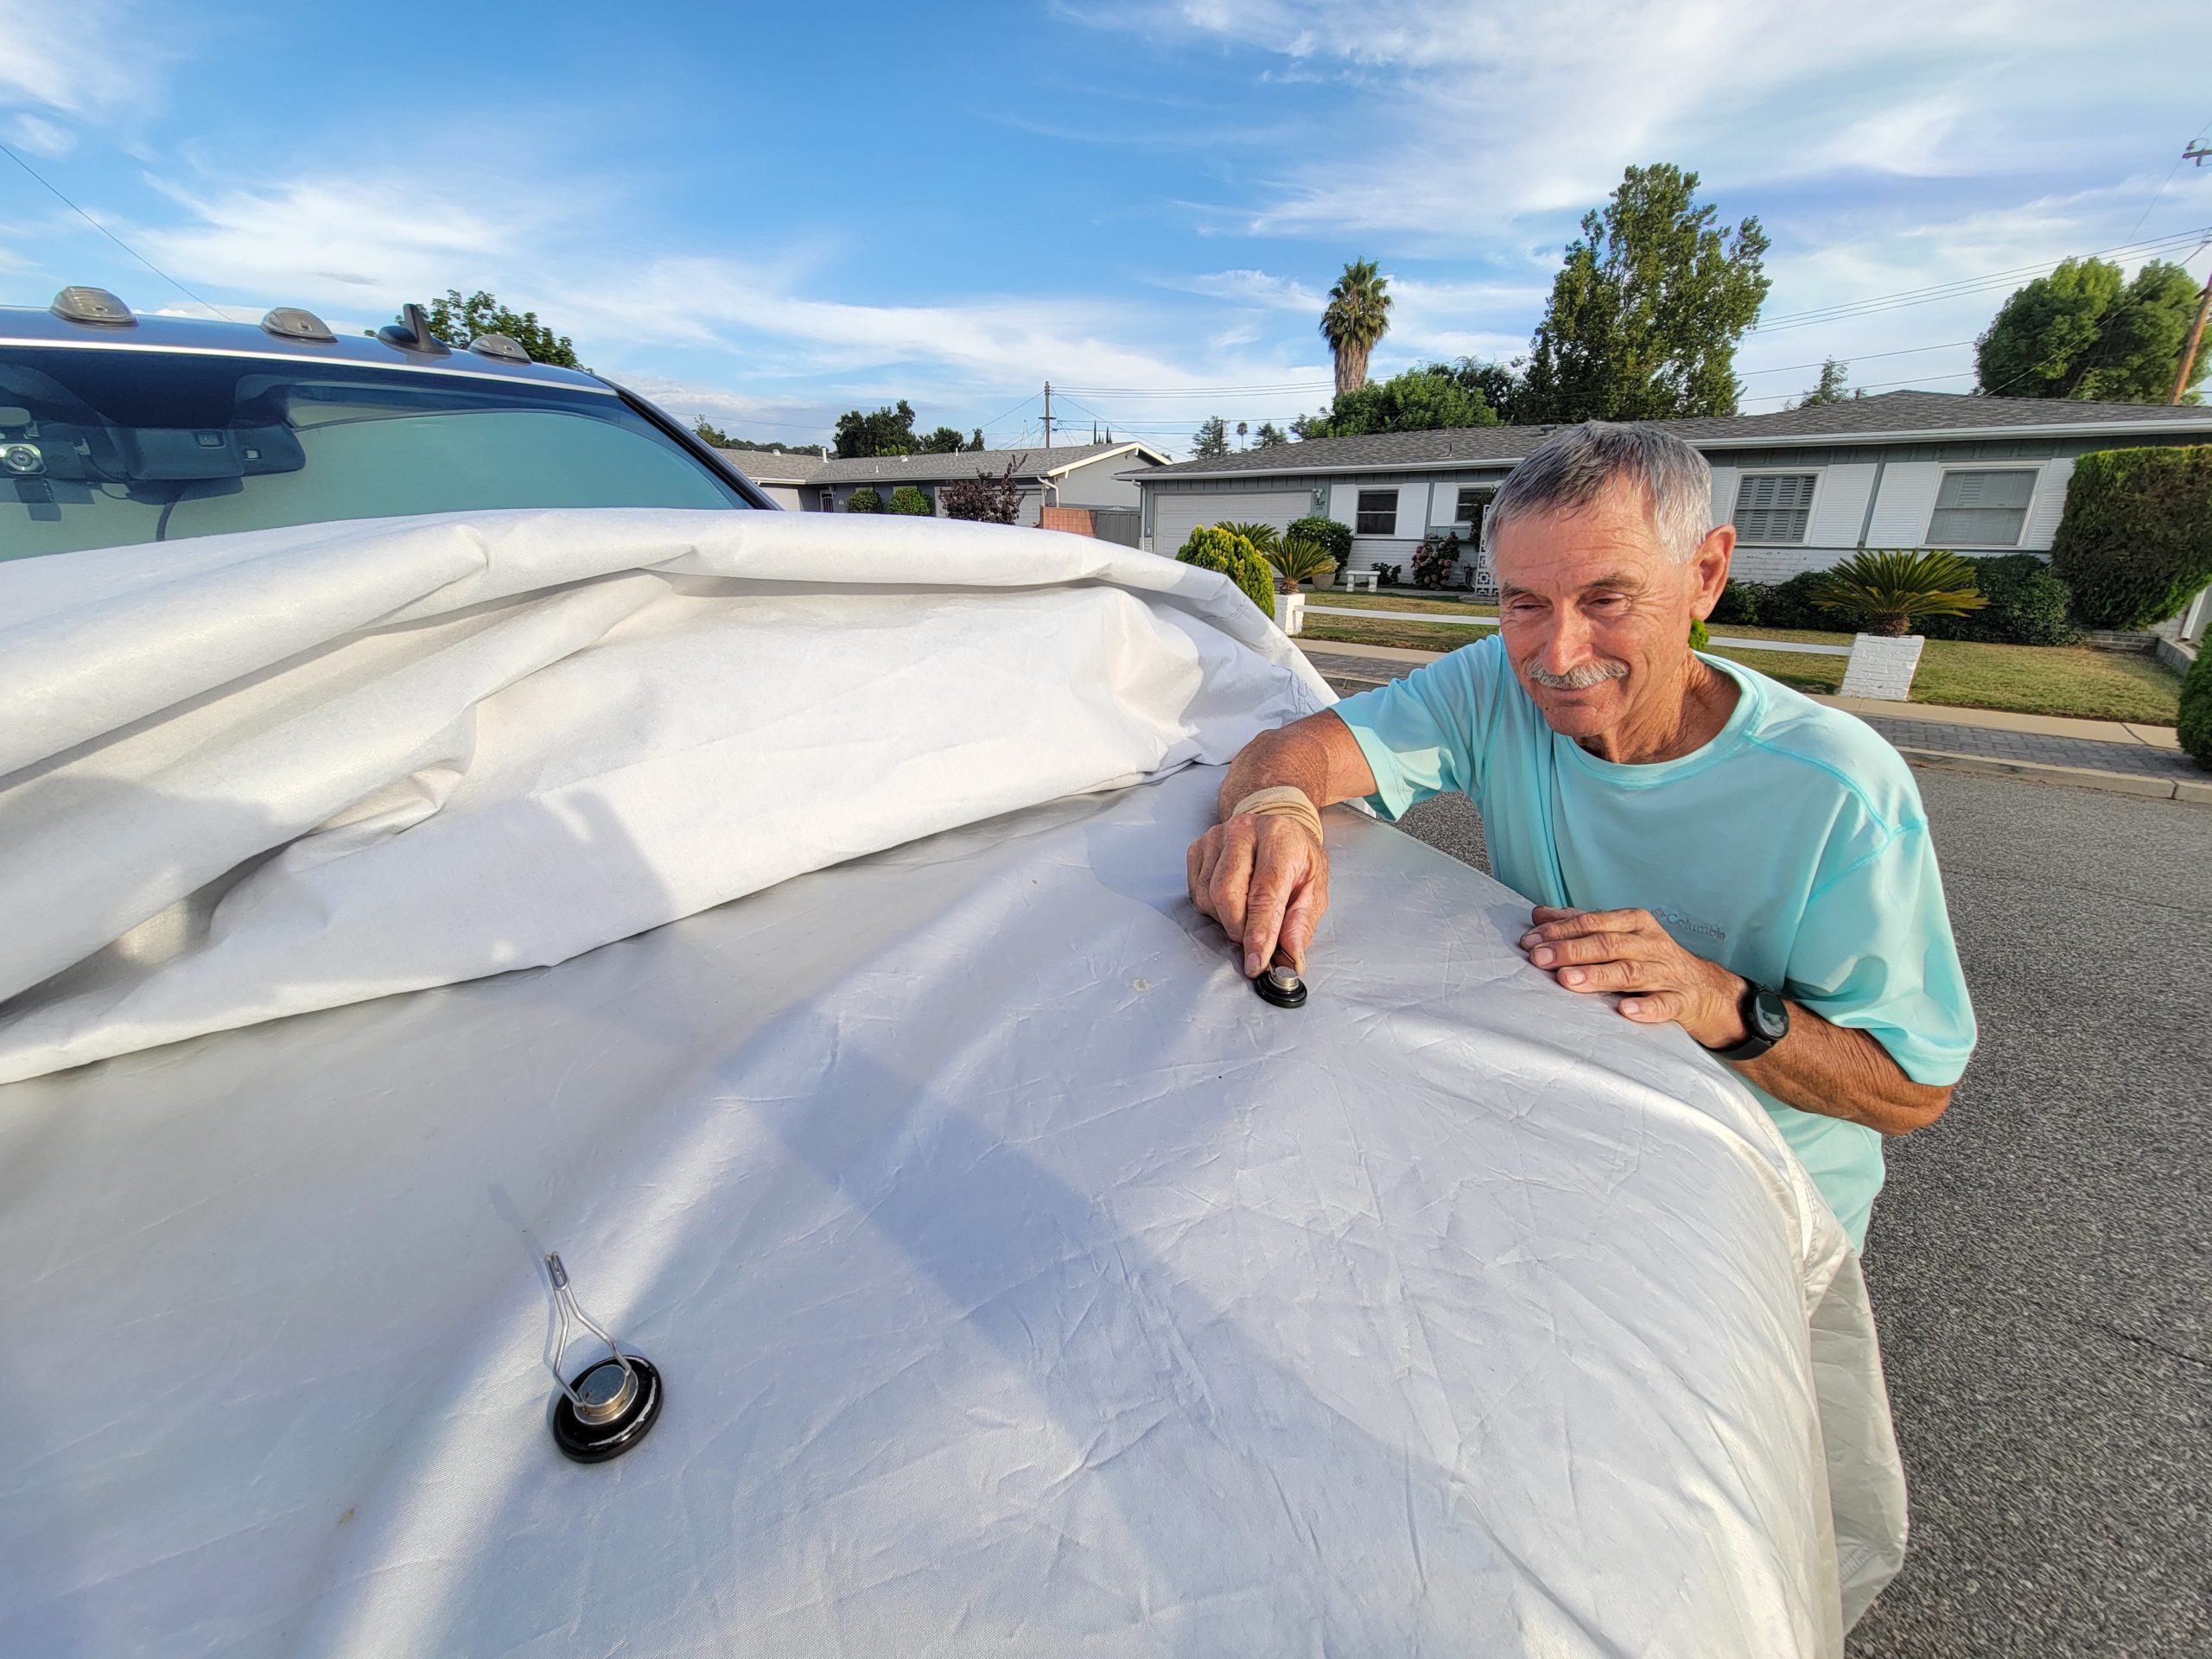 RV technician places magnets to anchor the car cover on the front section of the truck